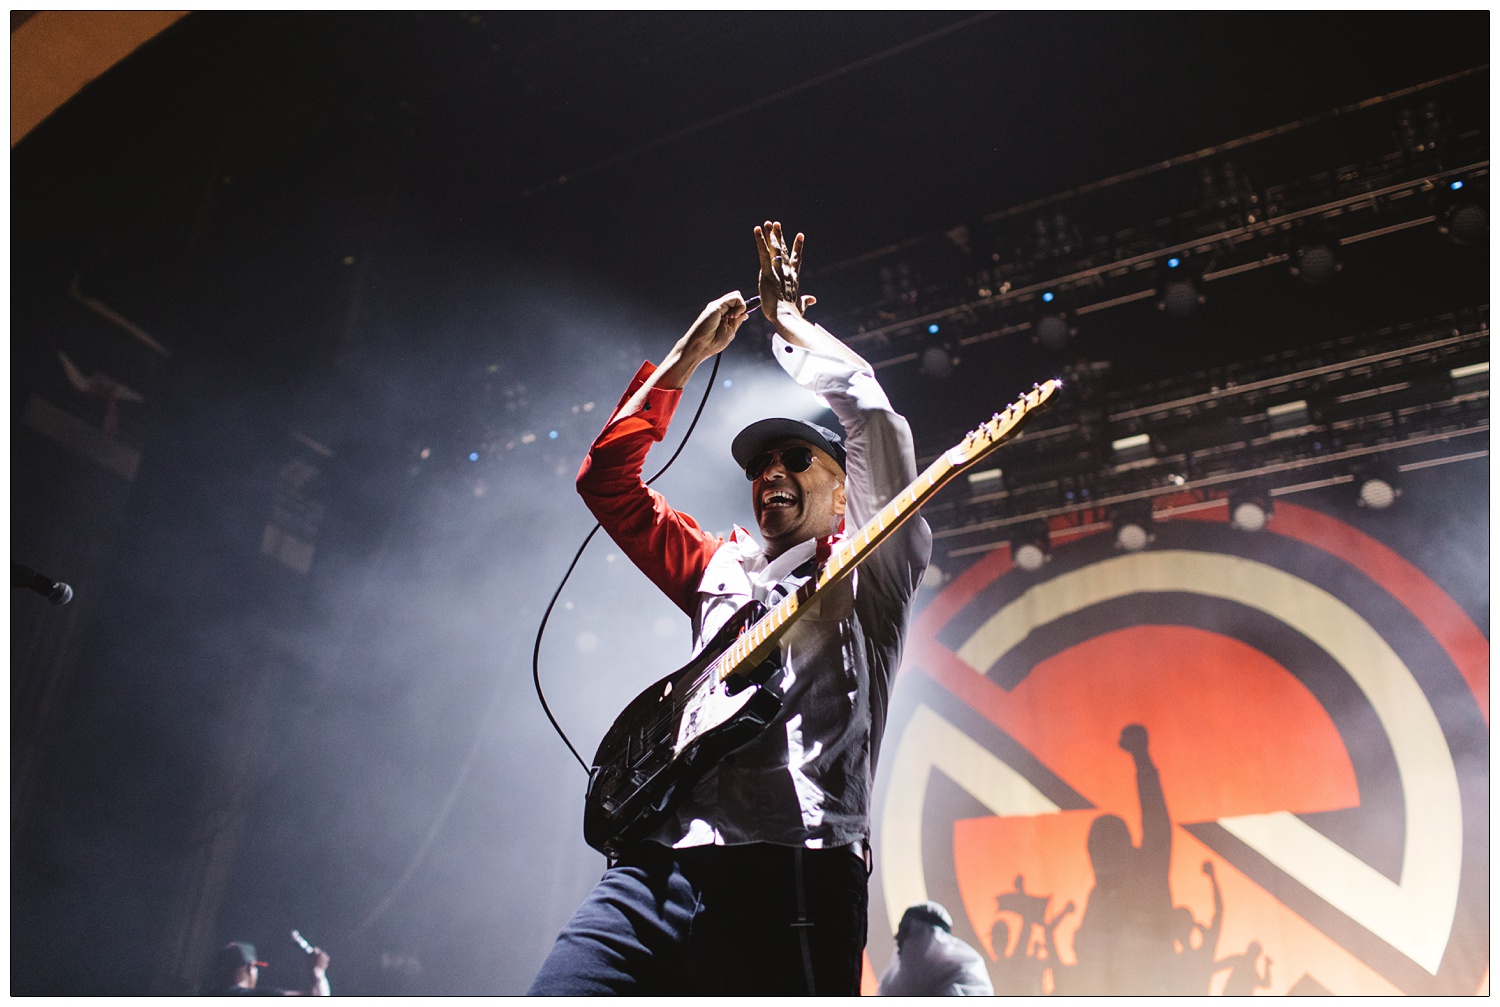 Tom Morello unplugging his guitar and touching the cable to make weird sound. At Brixton academy with Prophets of Rage..